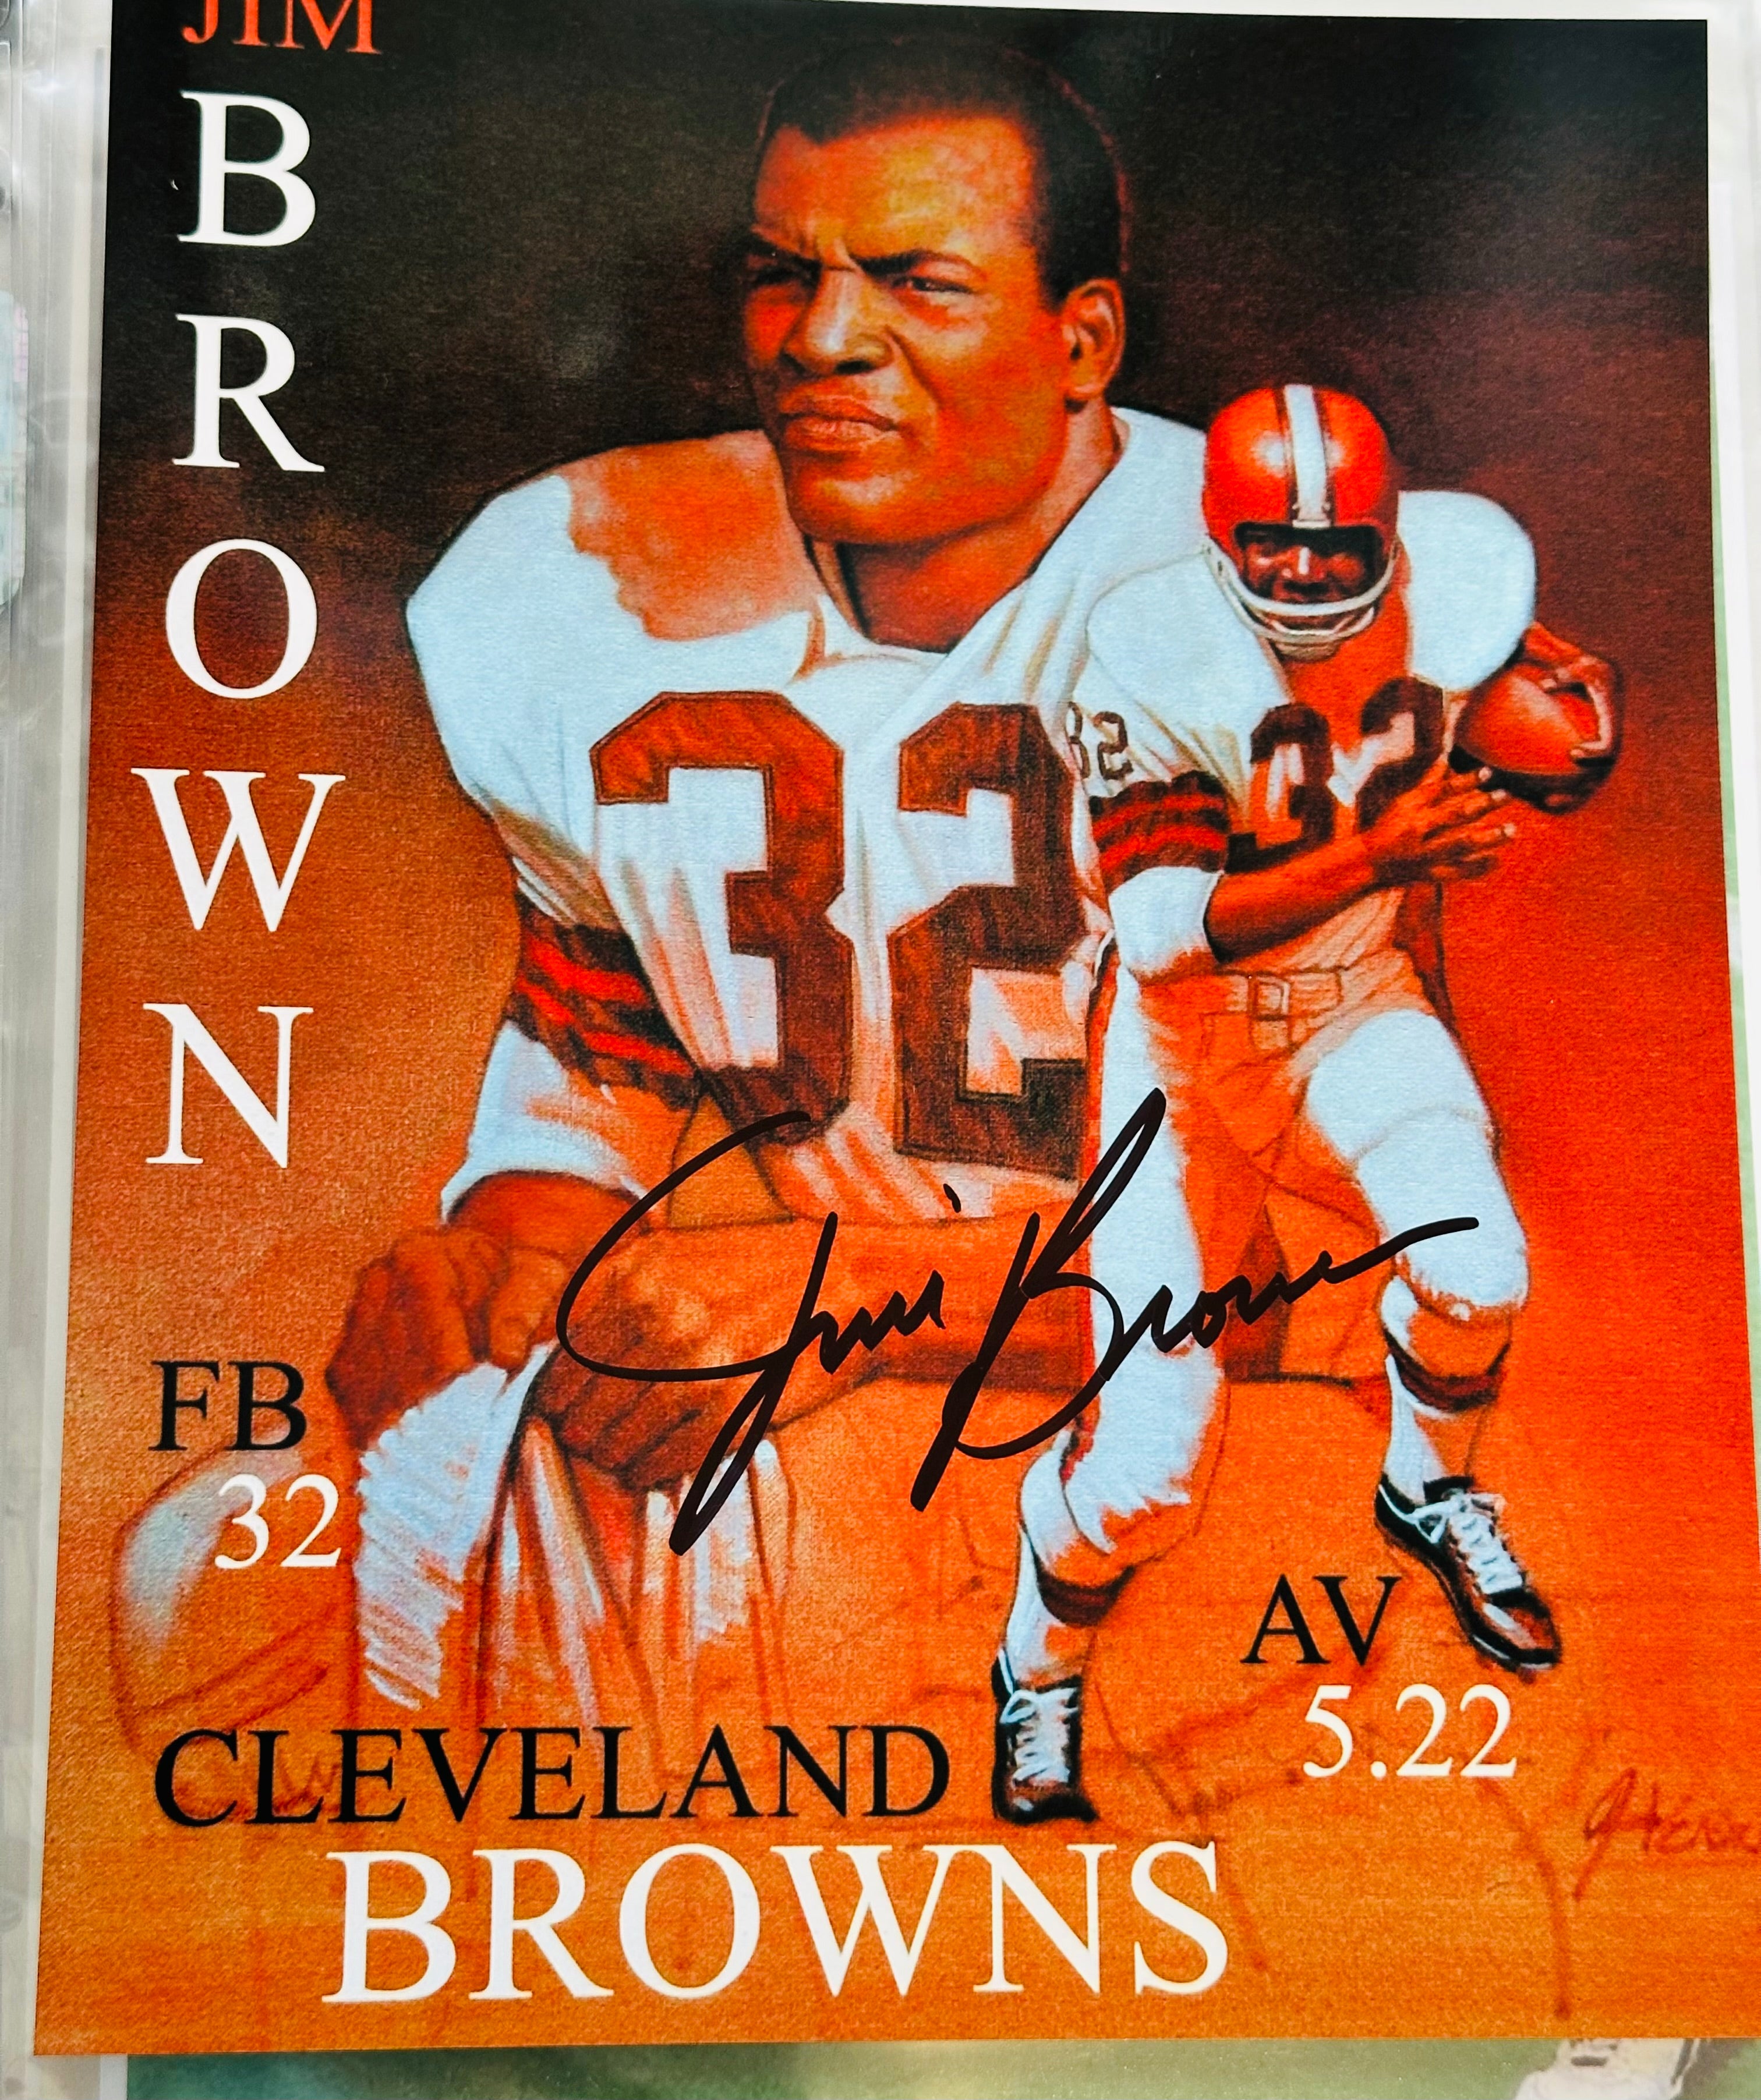 Jim Brown NFL legend rare 8x10 signed photo with COA